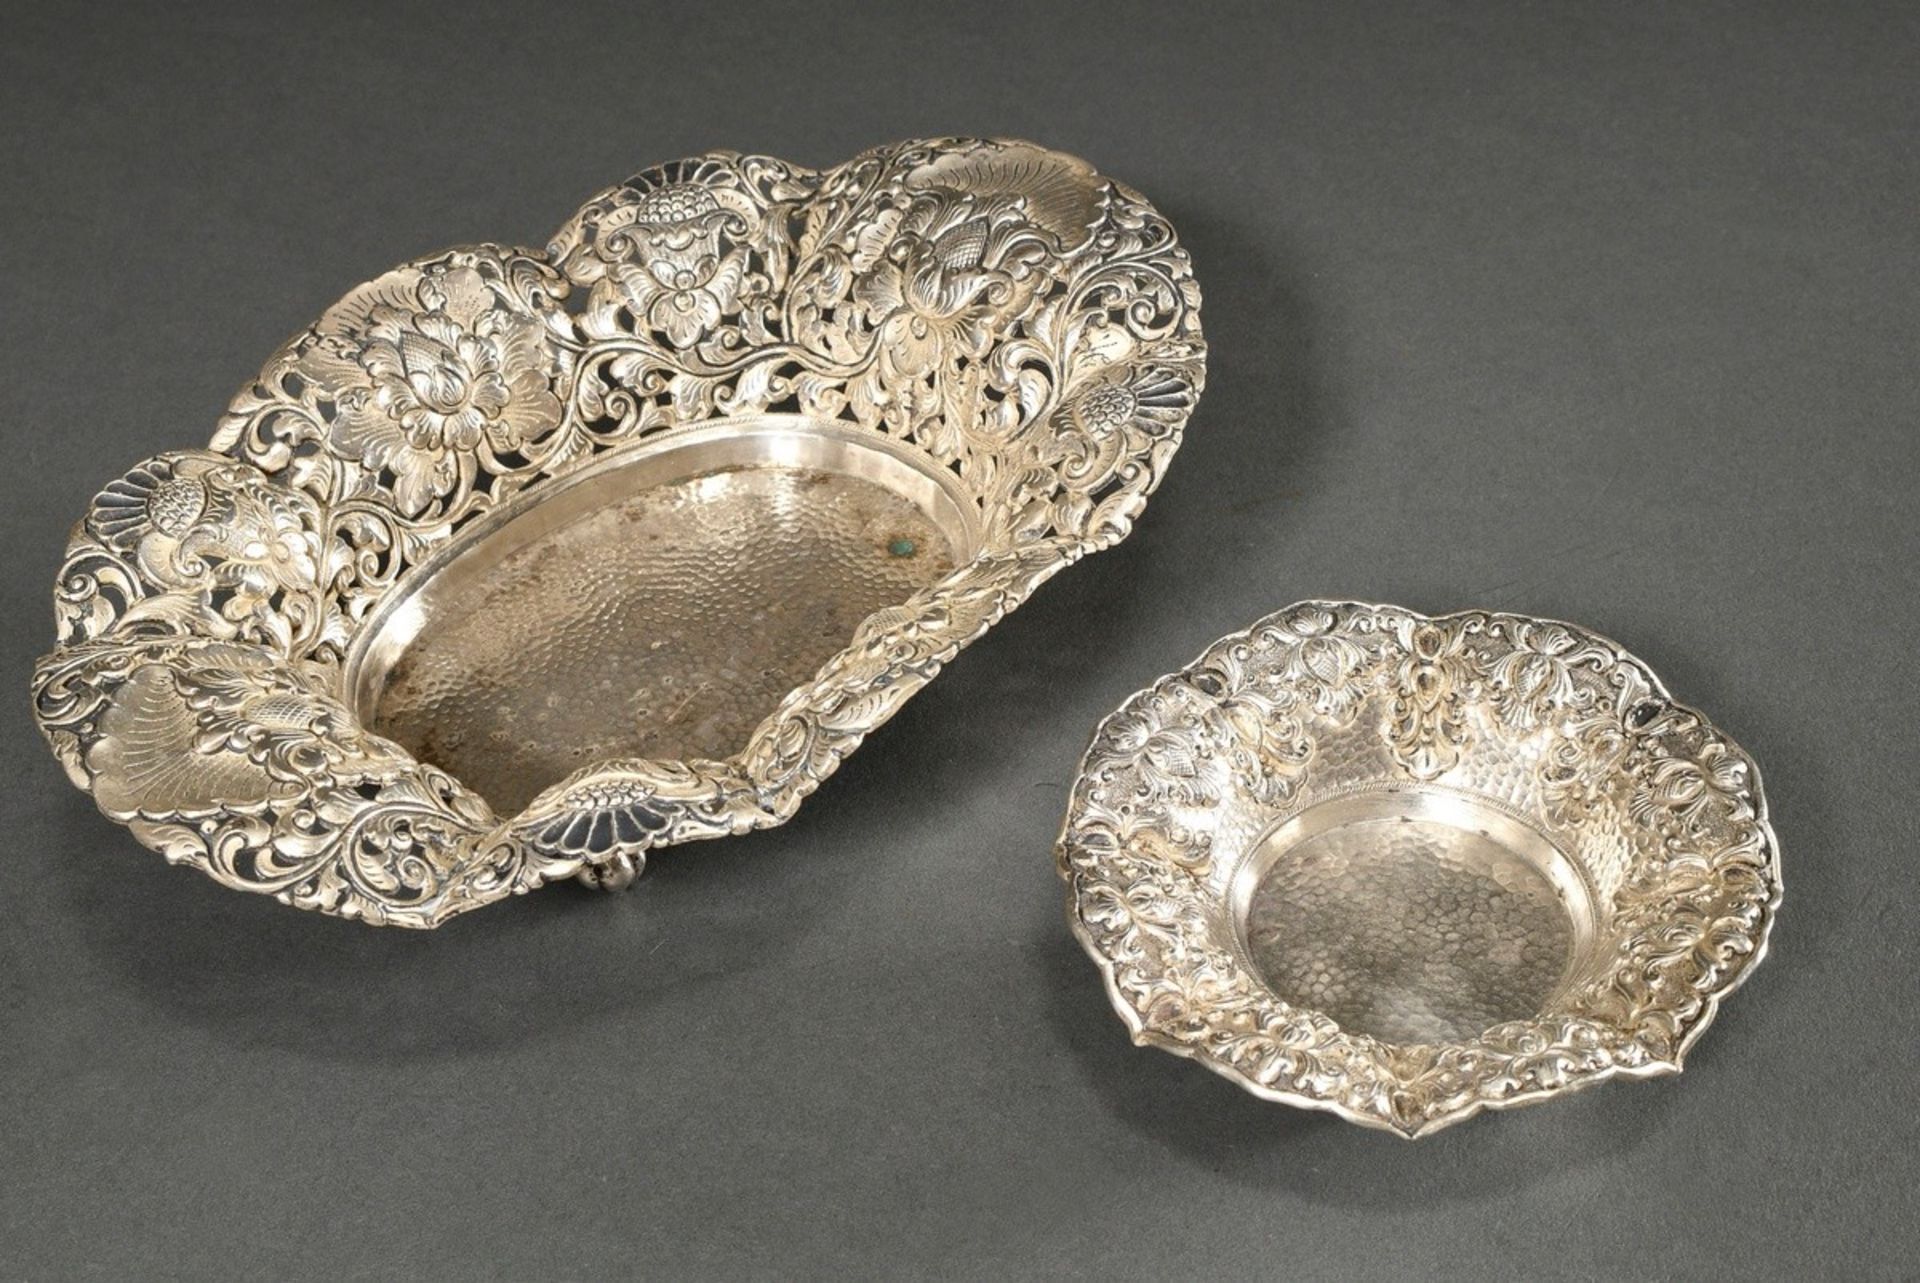 2 various small bowls with floral decor on ball feet, Java, silver, 192g, Ø 10cm, 20x13.5cm, signs 